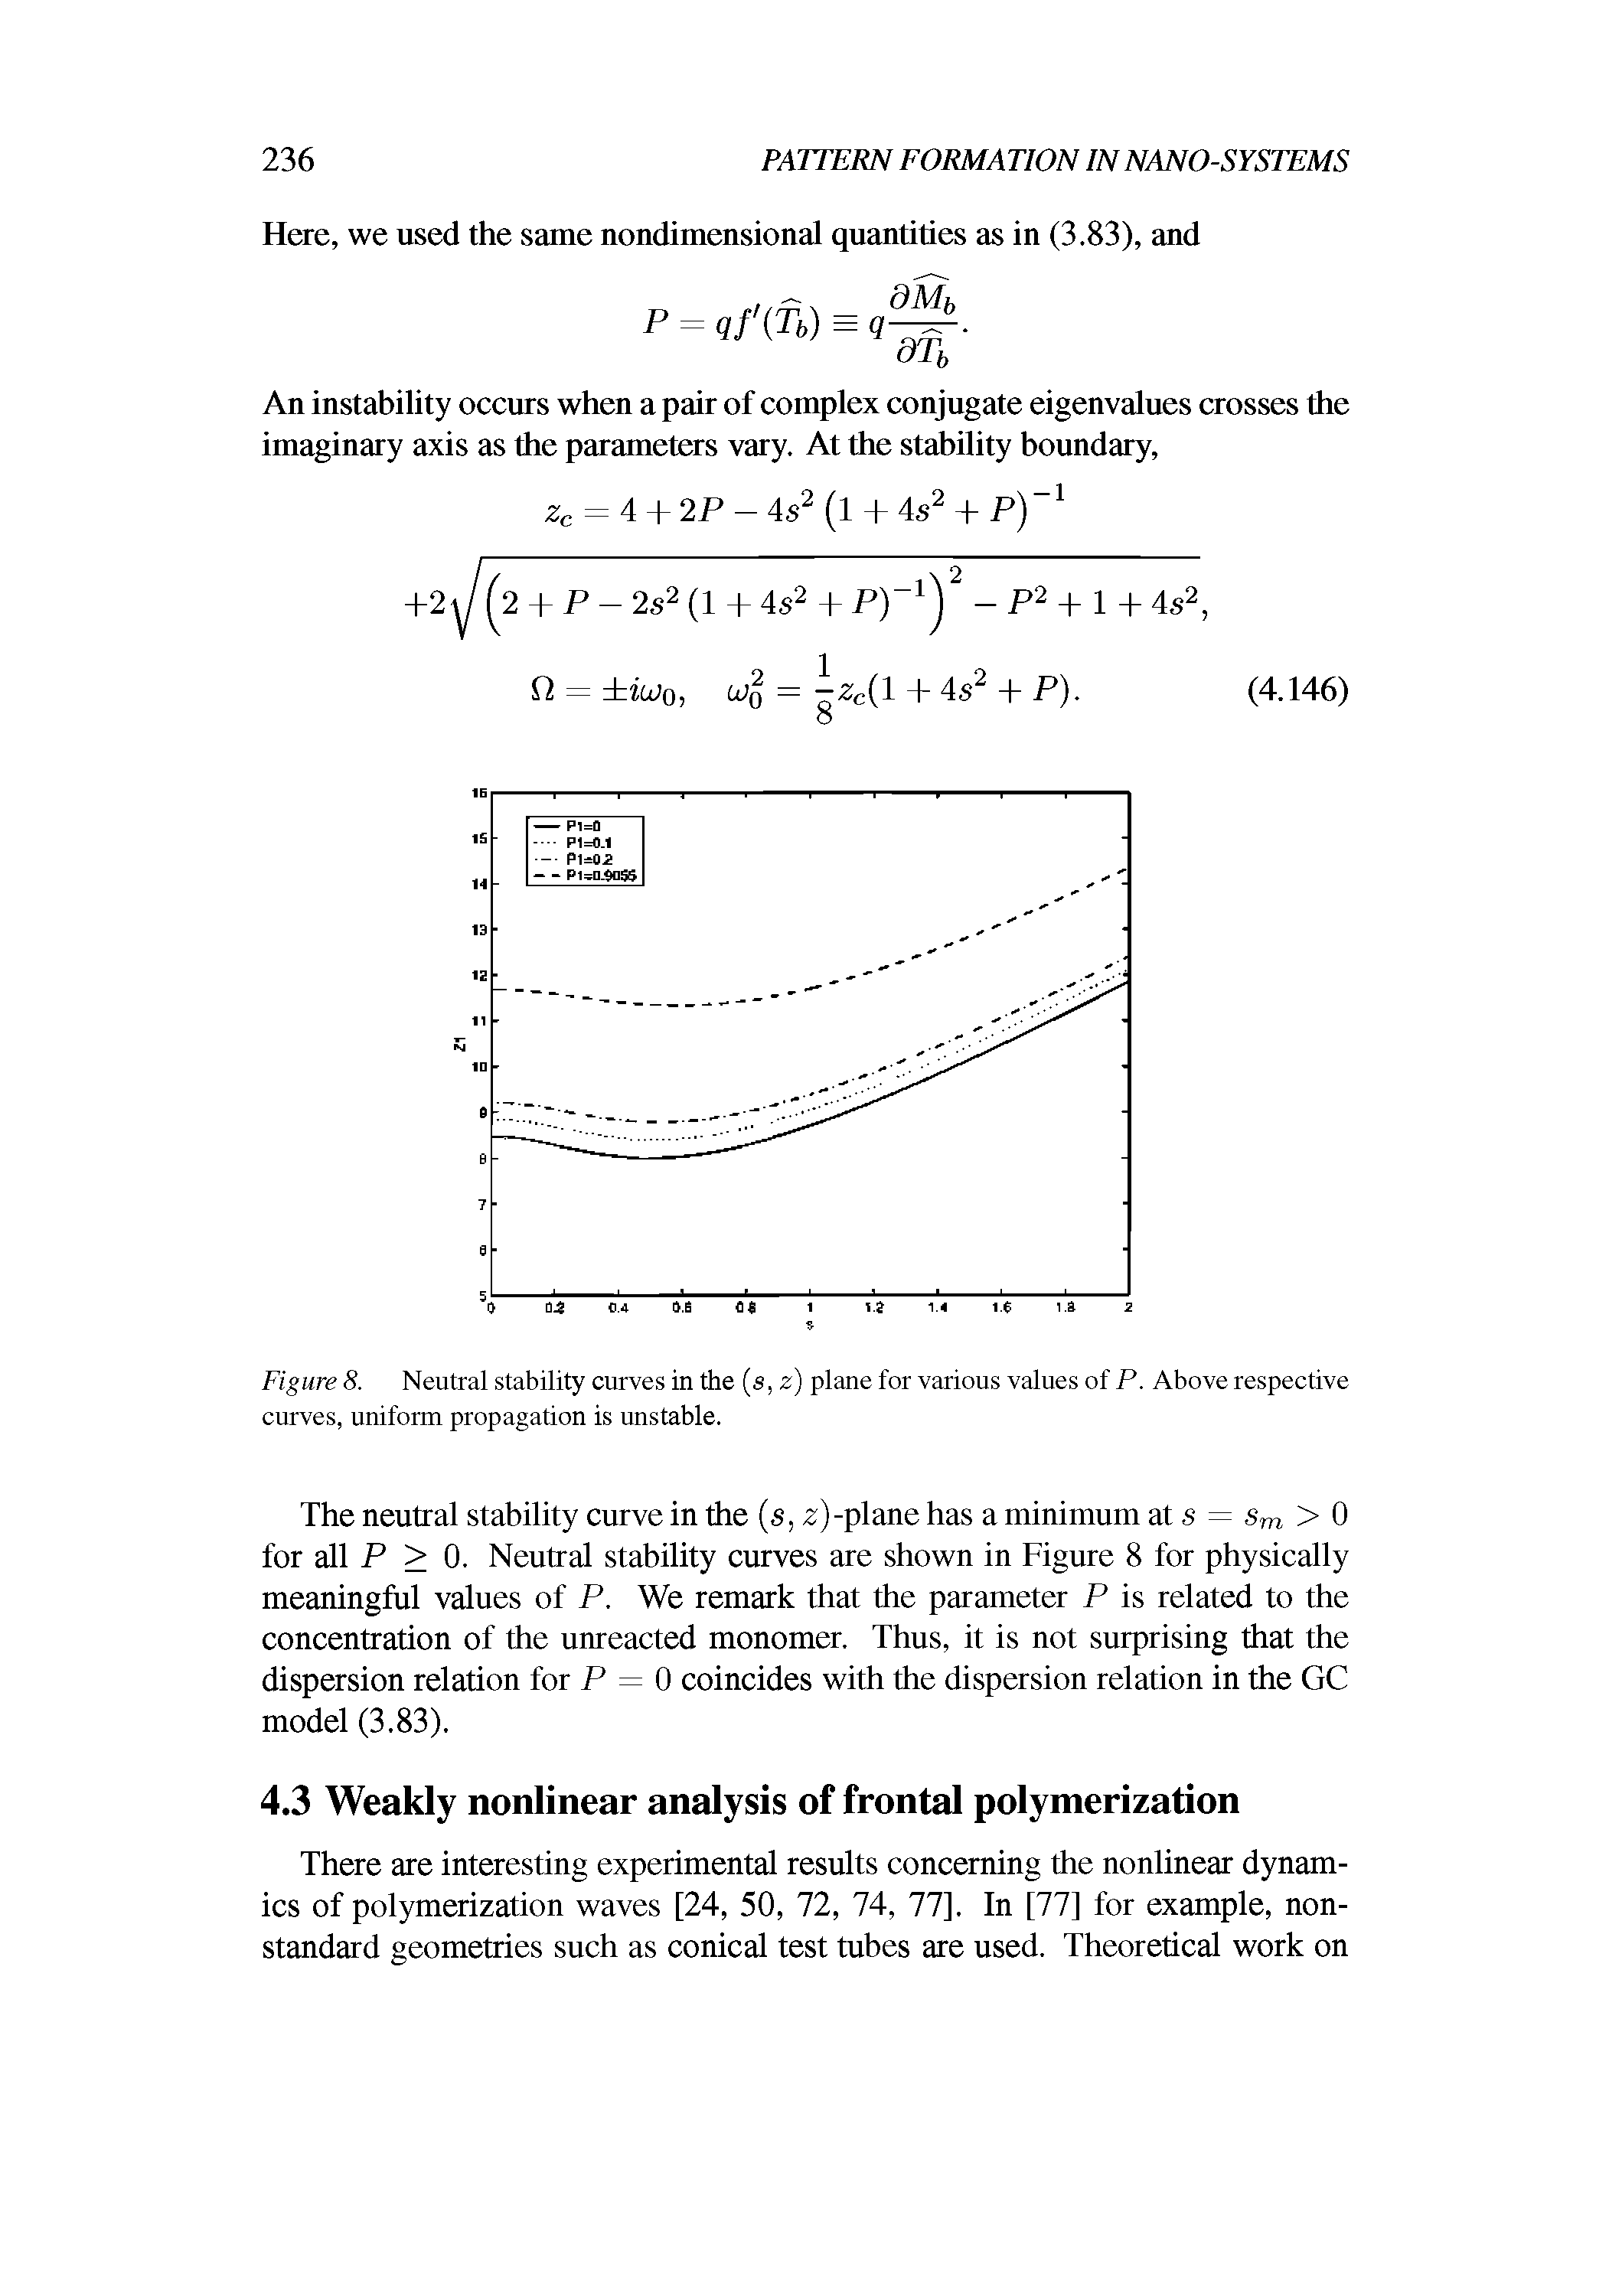 Figure 8. Neutral stability curves in the (s, z) plane for various values of P. Above respective curves, uniform propagation is unstable.